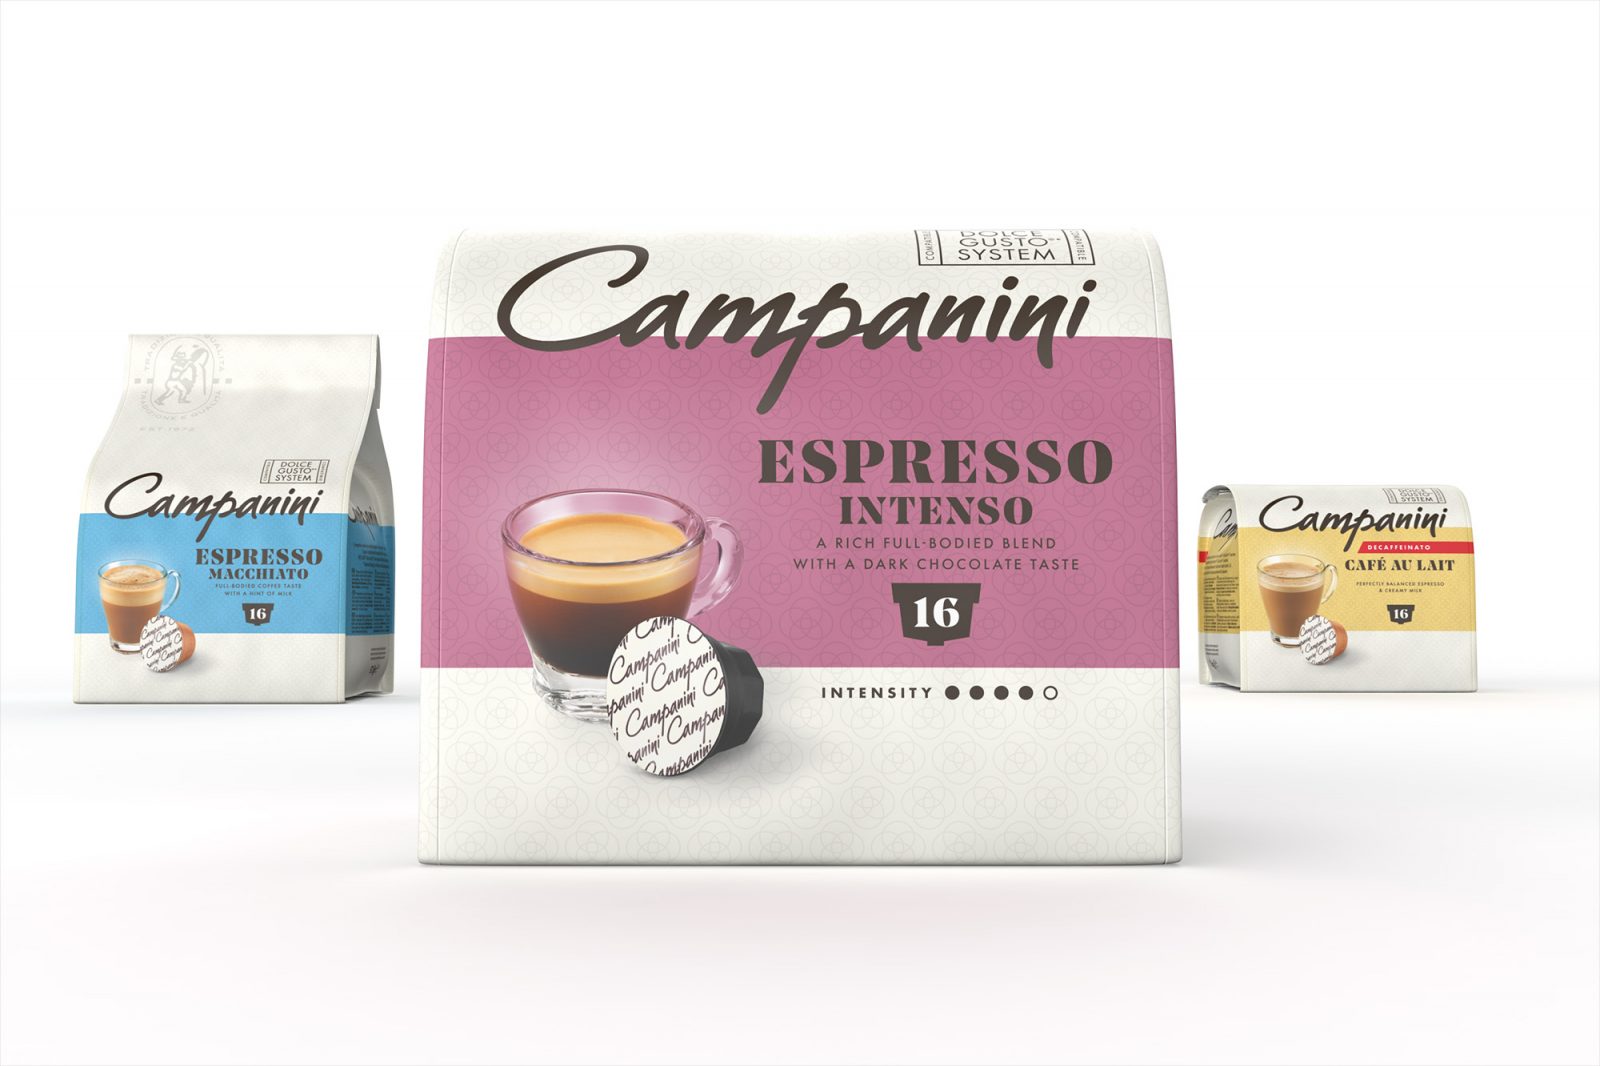 Brand Redesign for Single Serve Coffee Capsules with a Balance Between Heritage and Modernity